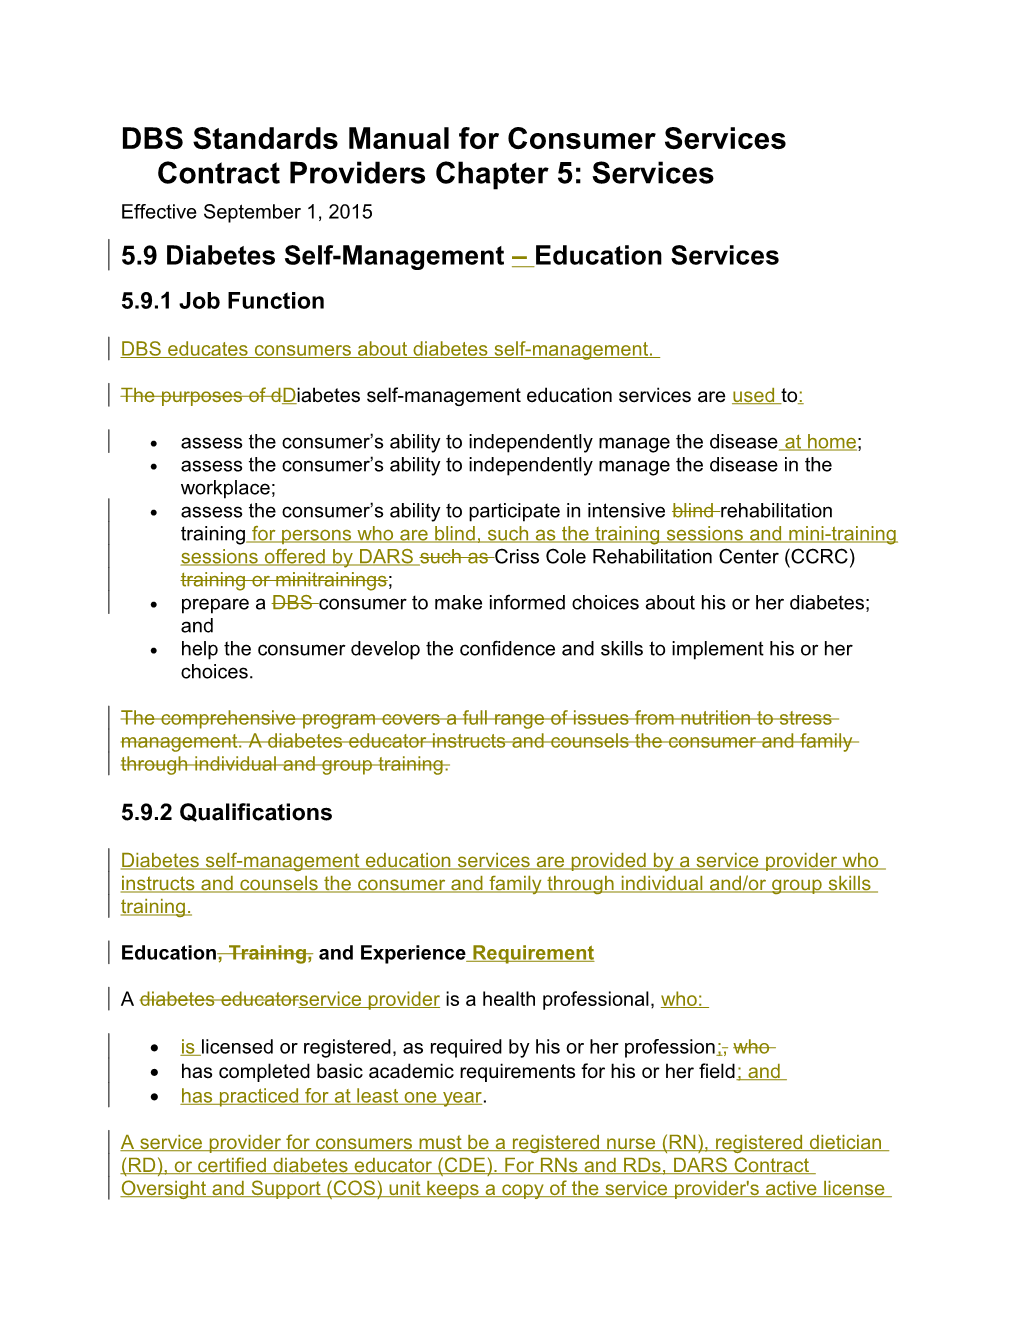 DBS Standards Manual for Consumer Services Contract Providers Chapter 5 Revisions, September